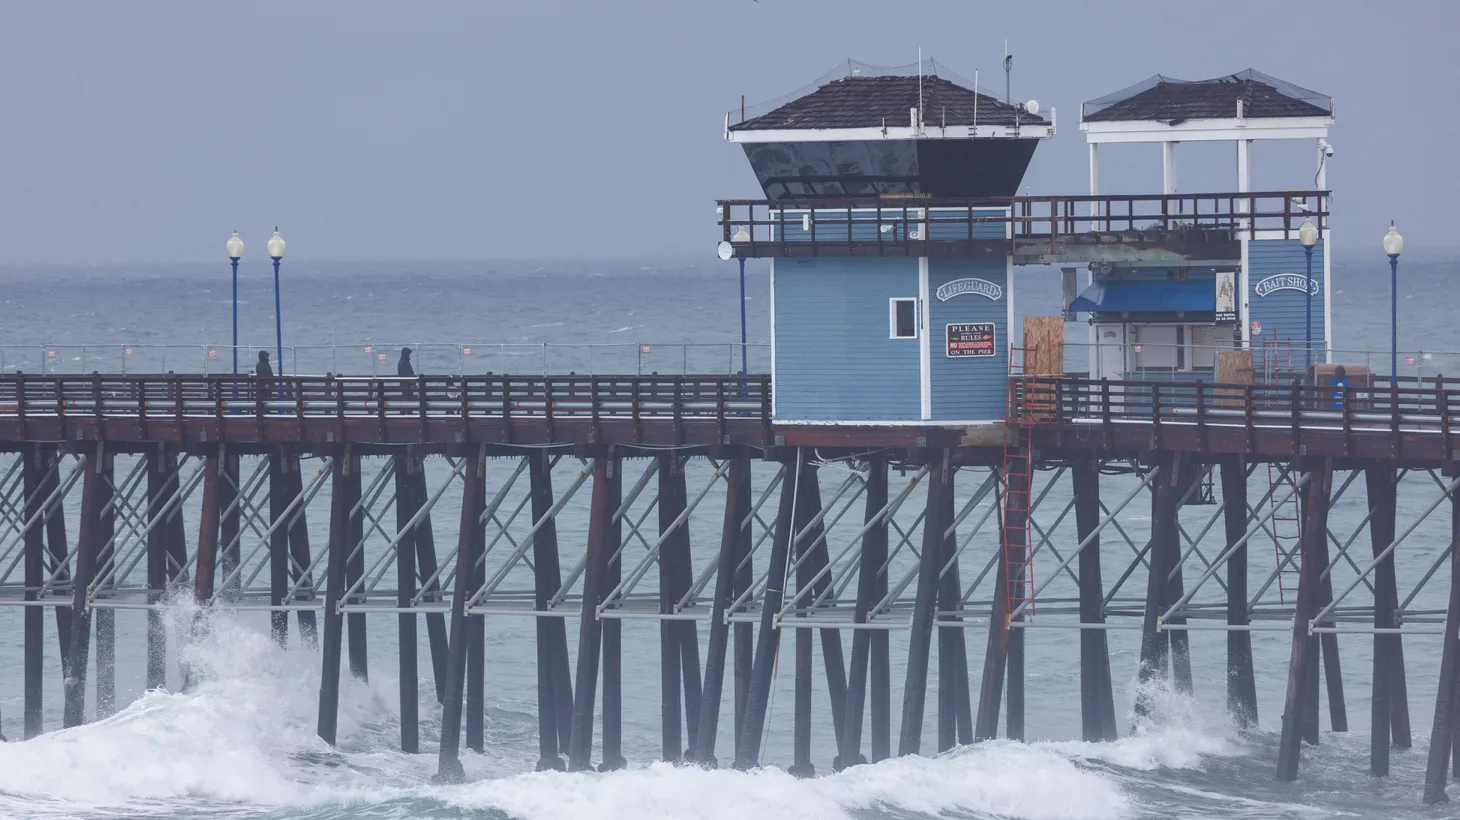 People walk along the pier during a winter storm in Oceanside, California, U.S., January 10, 2023.